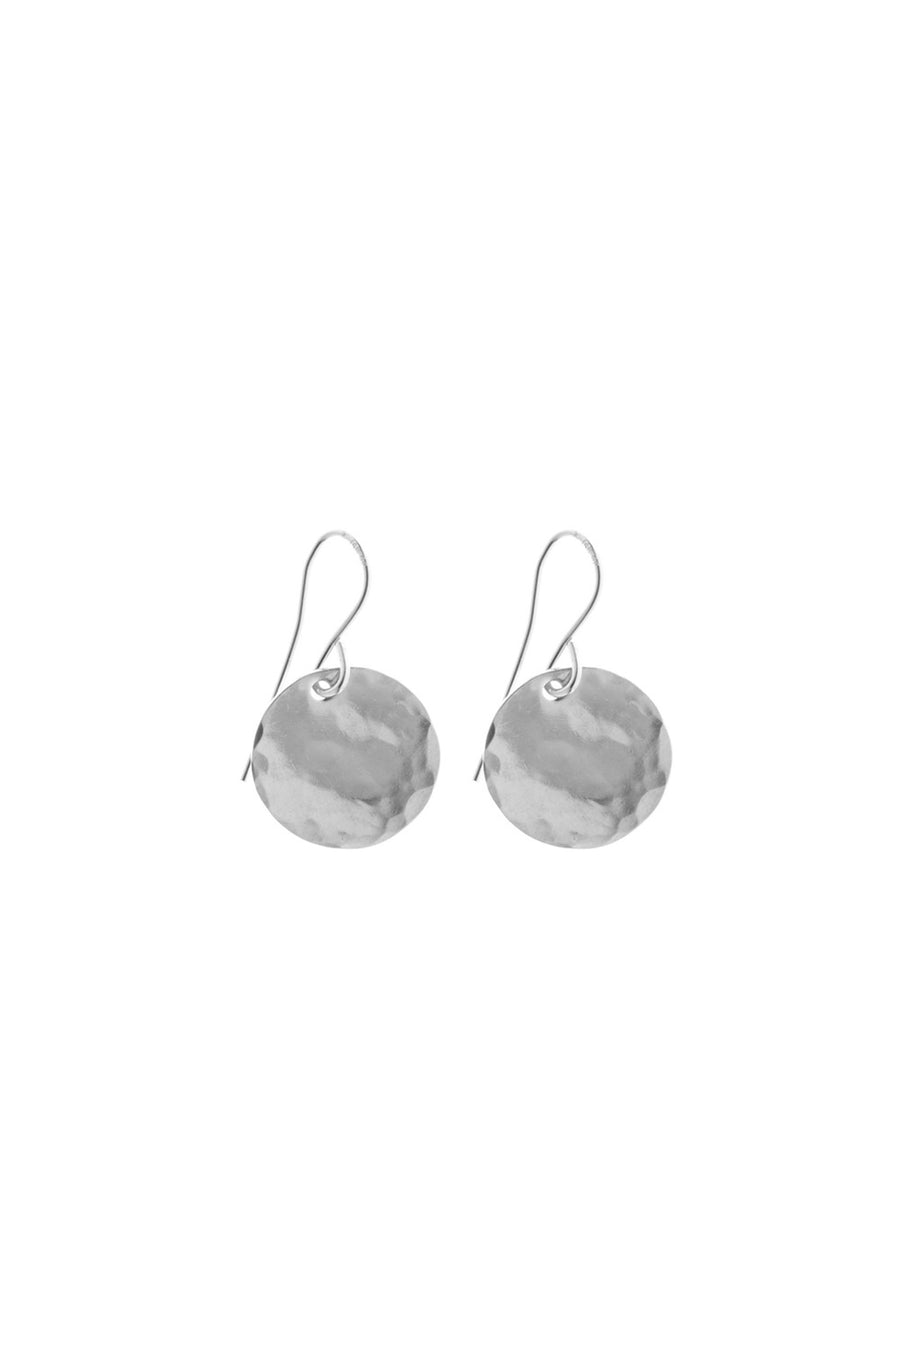 MINI HAMMERED DISK EARRING SILVER - CrateExpectations